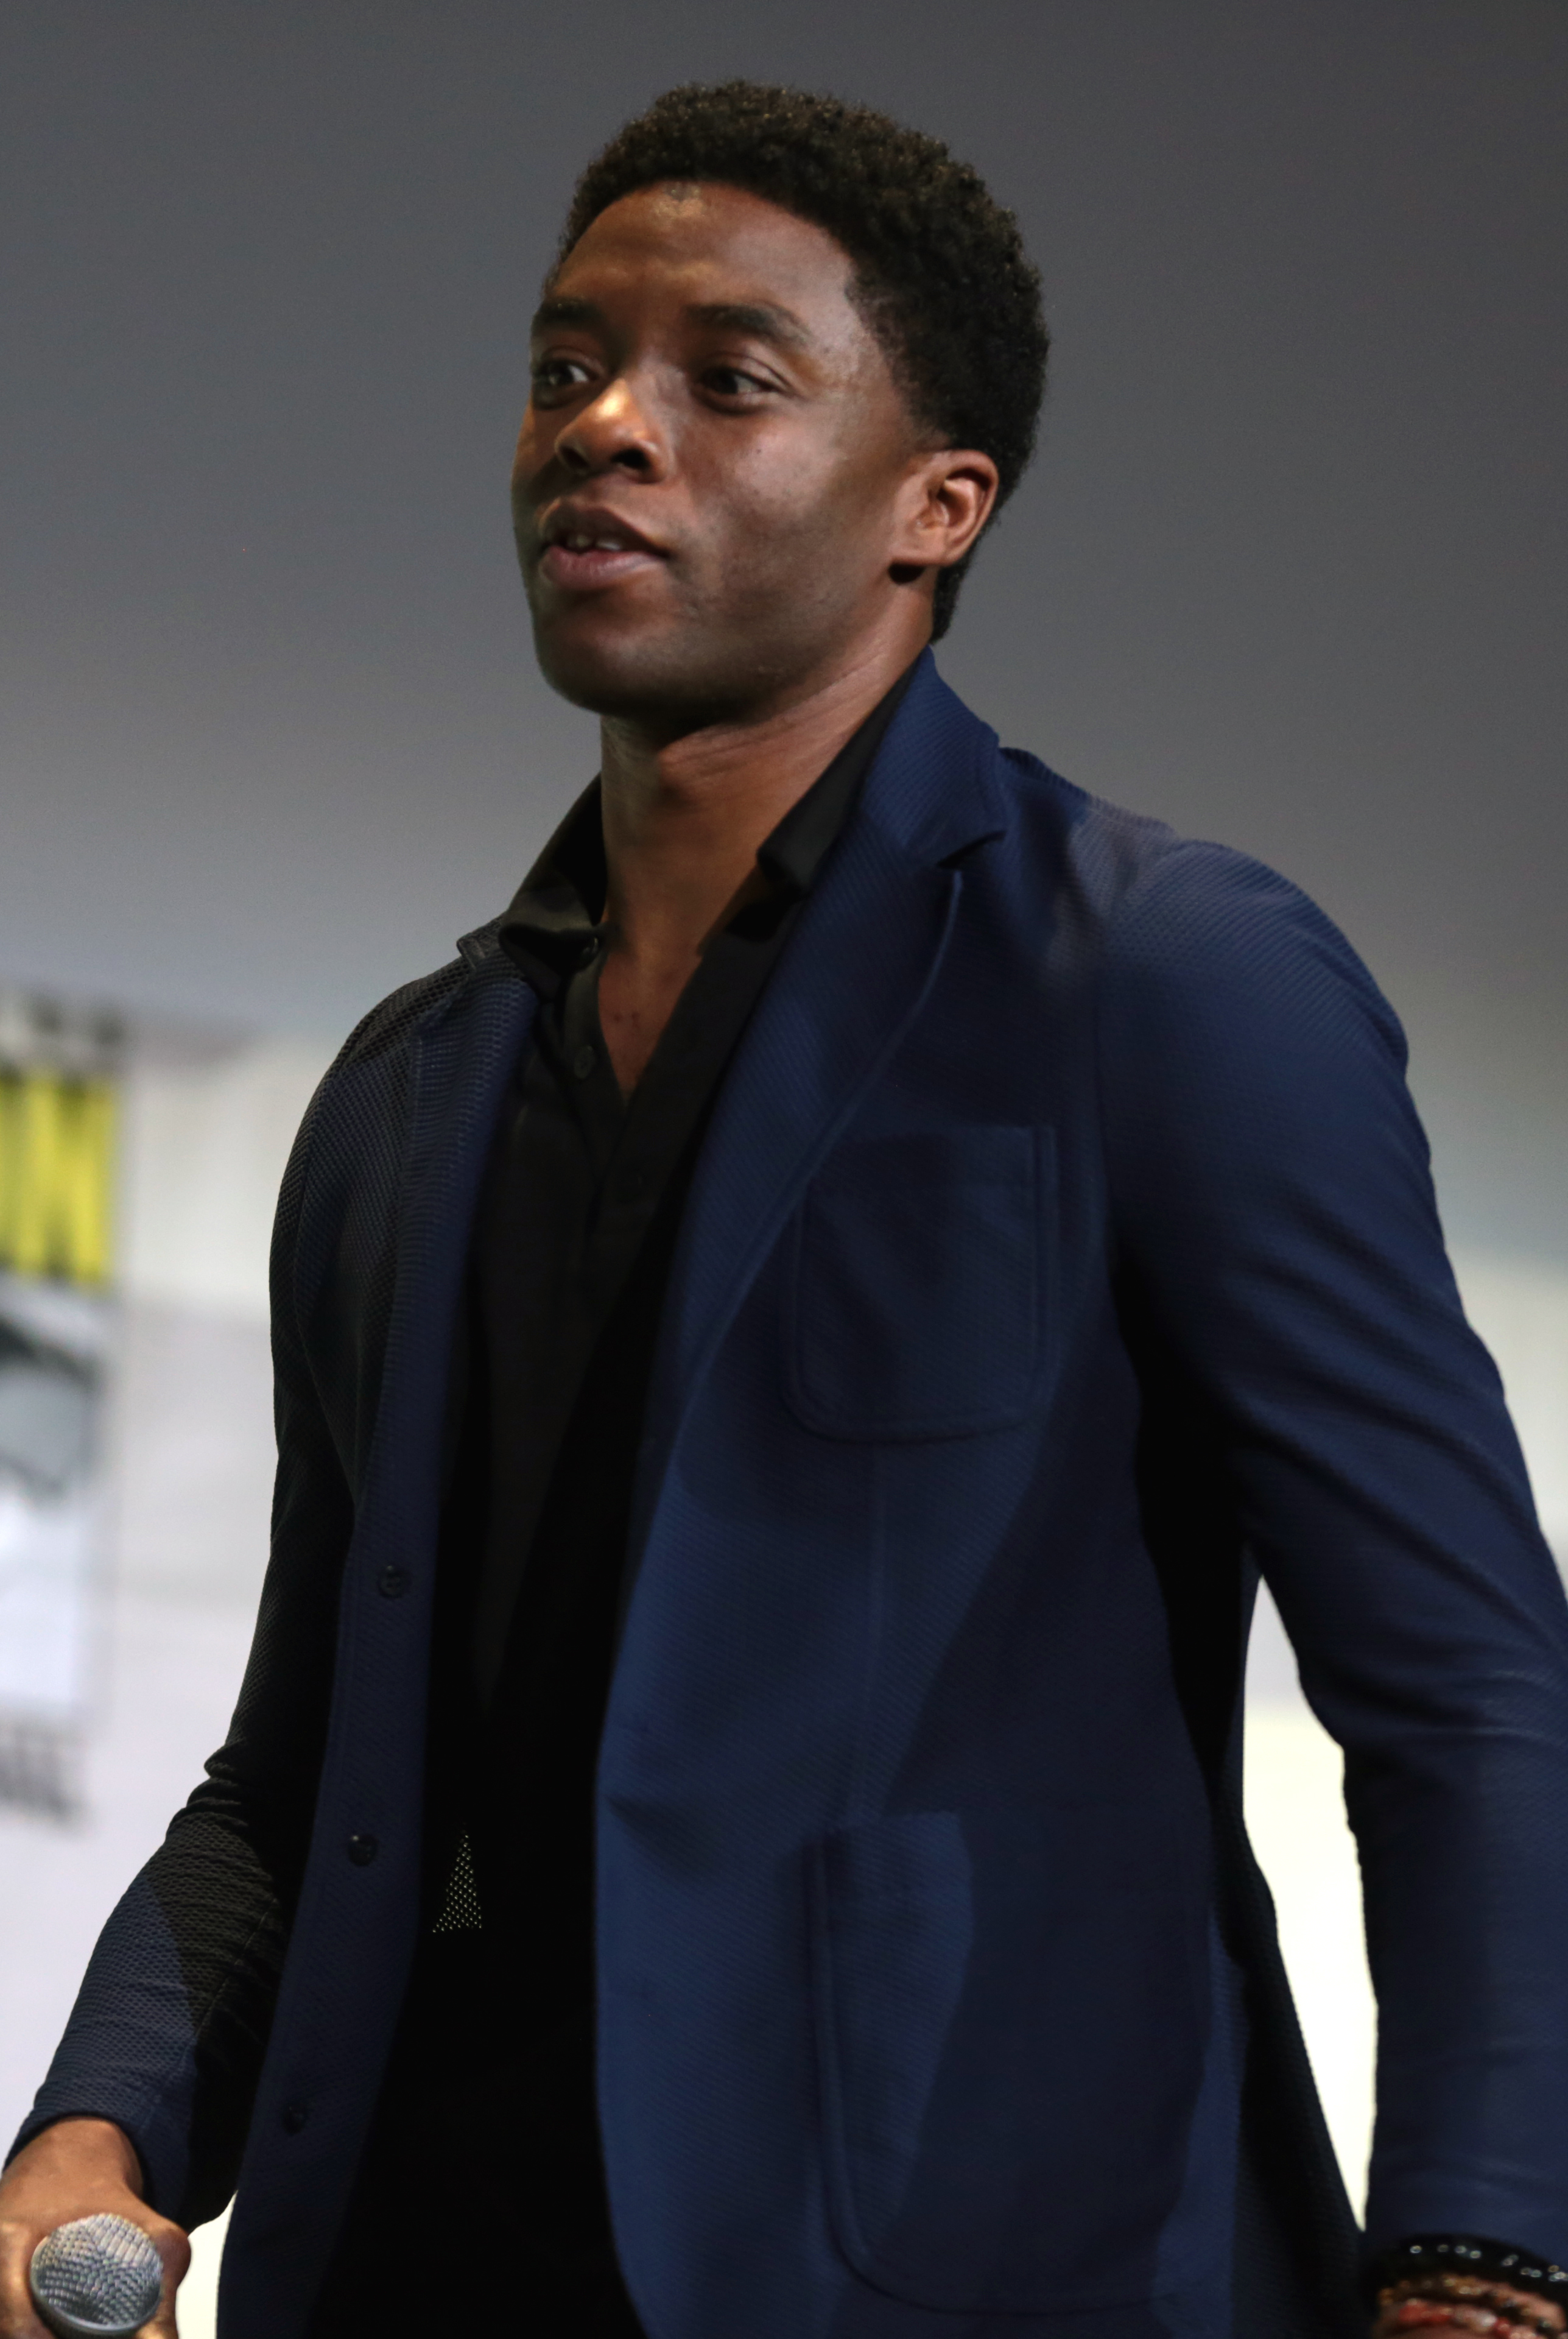 Entertainment News Roundup: How Disney should handle 'Black Panther 2' after Chadwick Boseman's death; Robert Pattinson's positive test on 'Batman' set underscores challenges for Hollywood and more